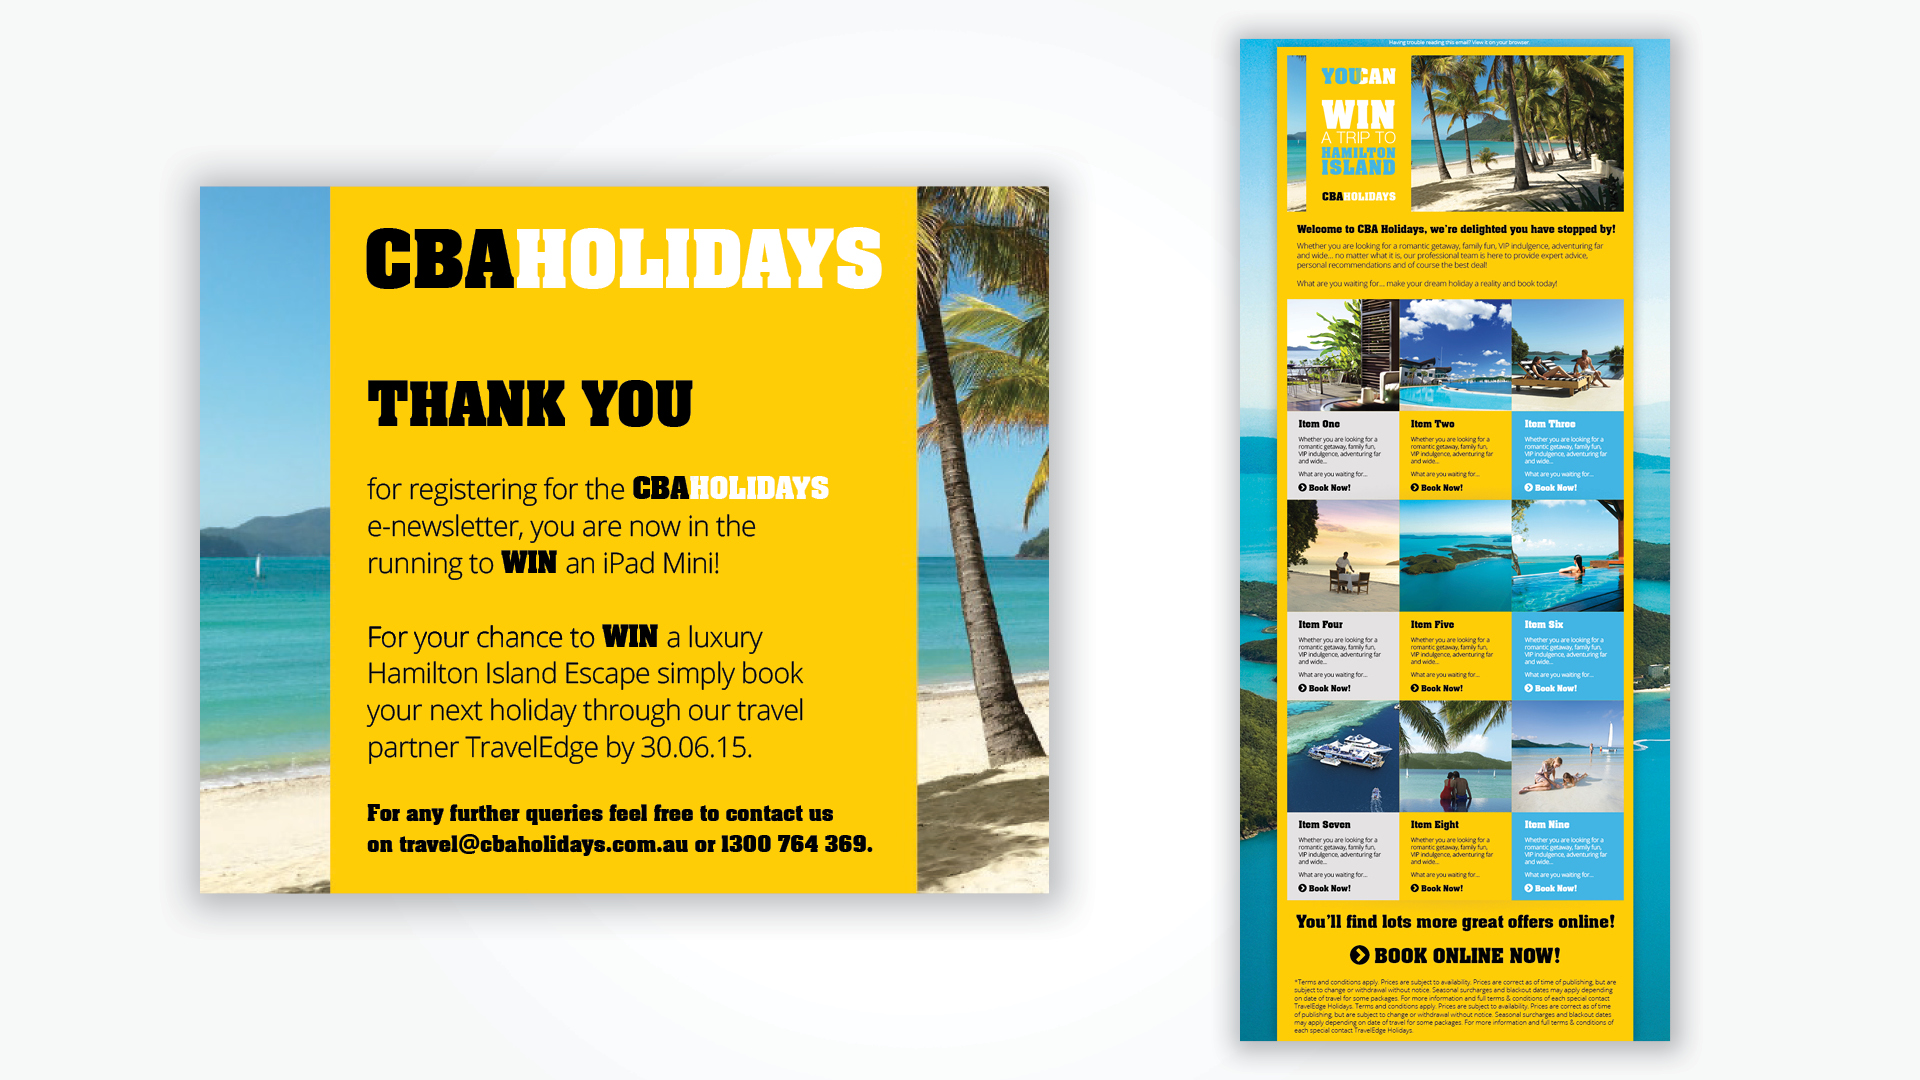 CommBank Holidays Microsite launch 4